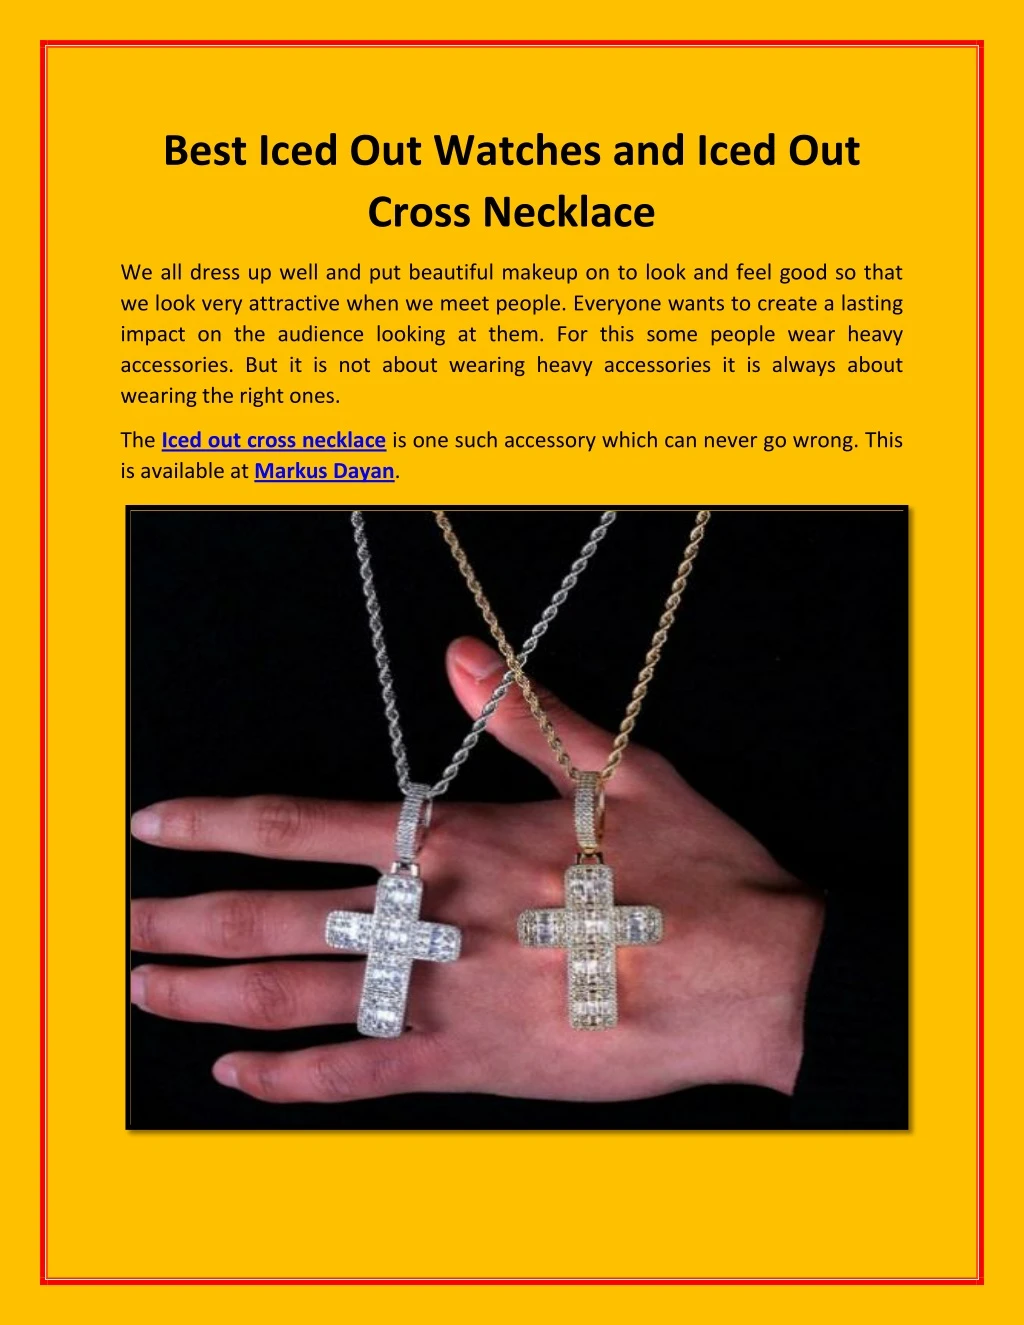 best iced out watches and iced out cross necklace